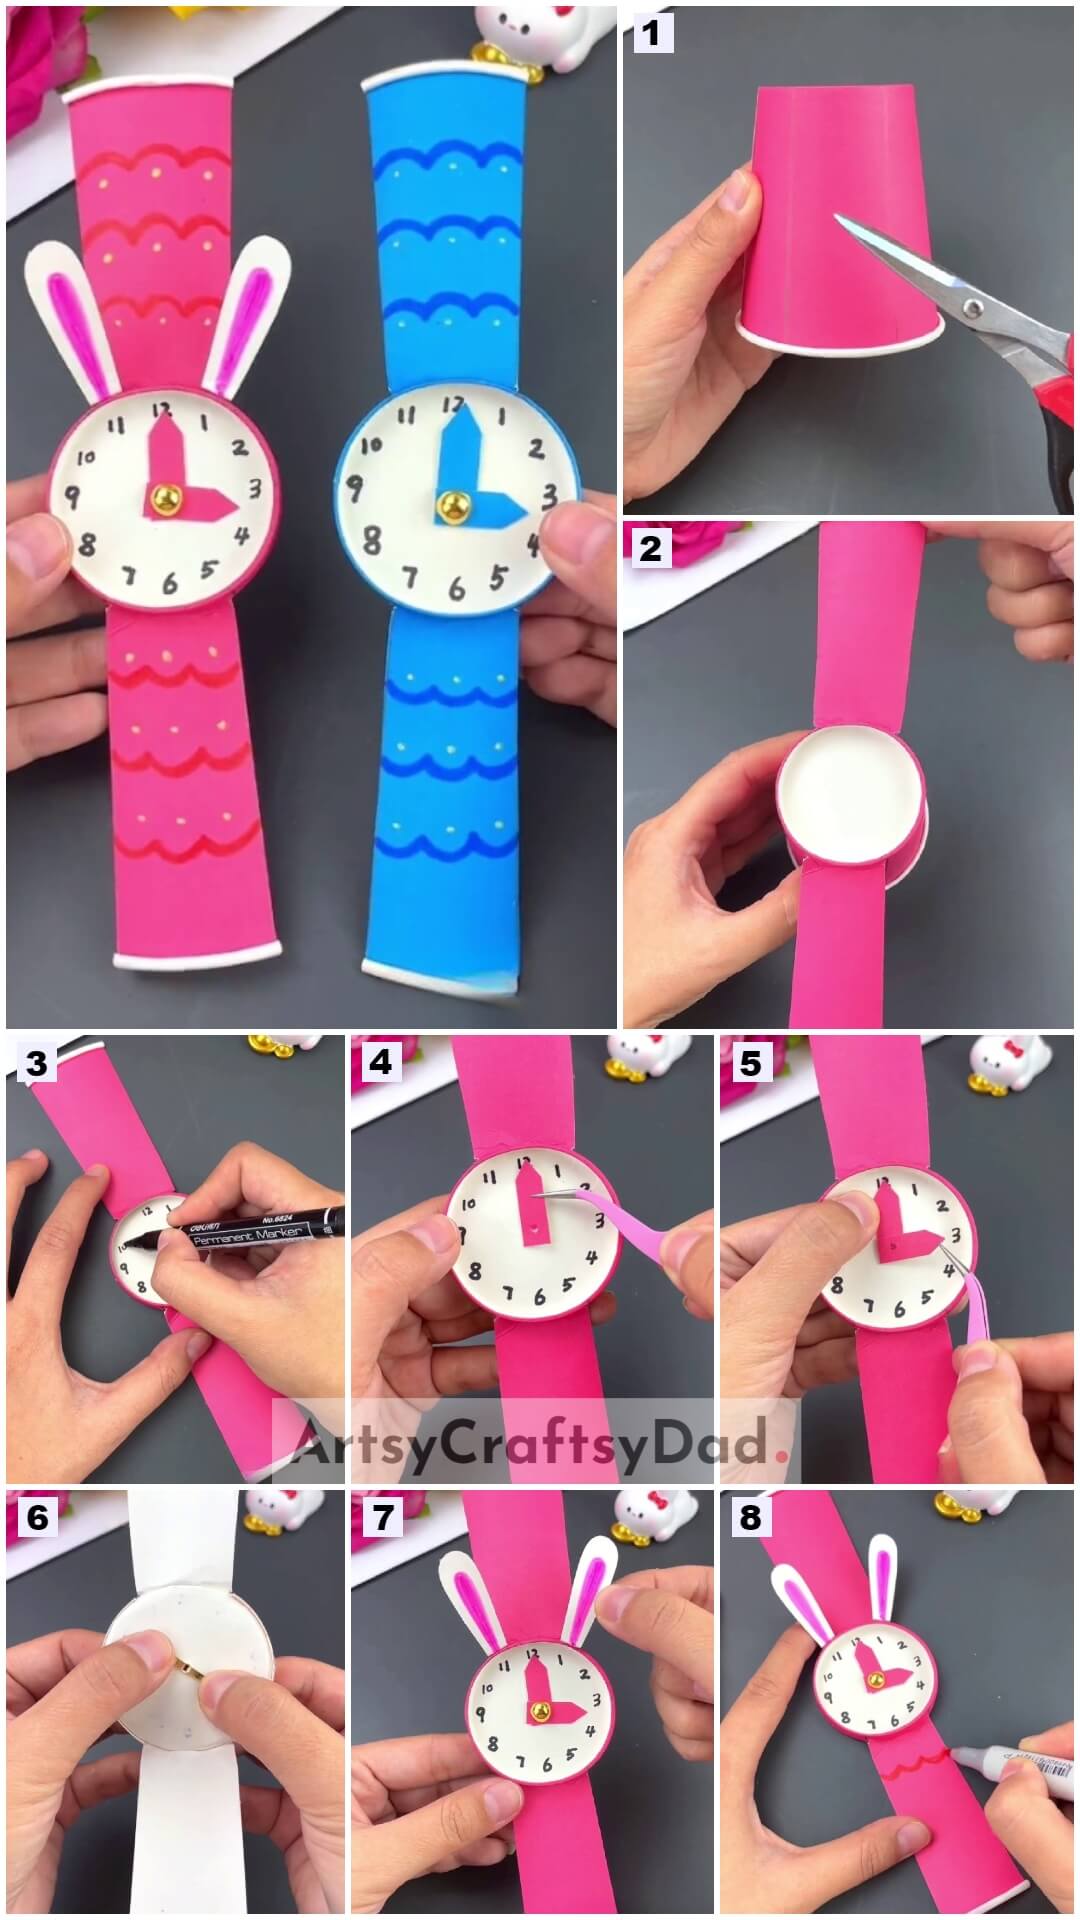 How To Make Paper Cup Wrist Watch Craft Tutorial for Kids